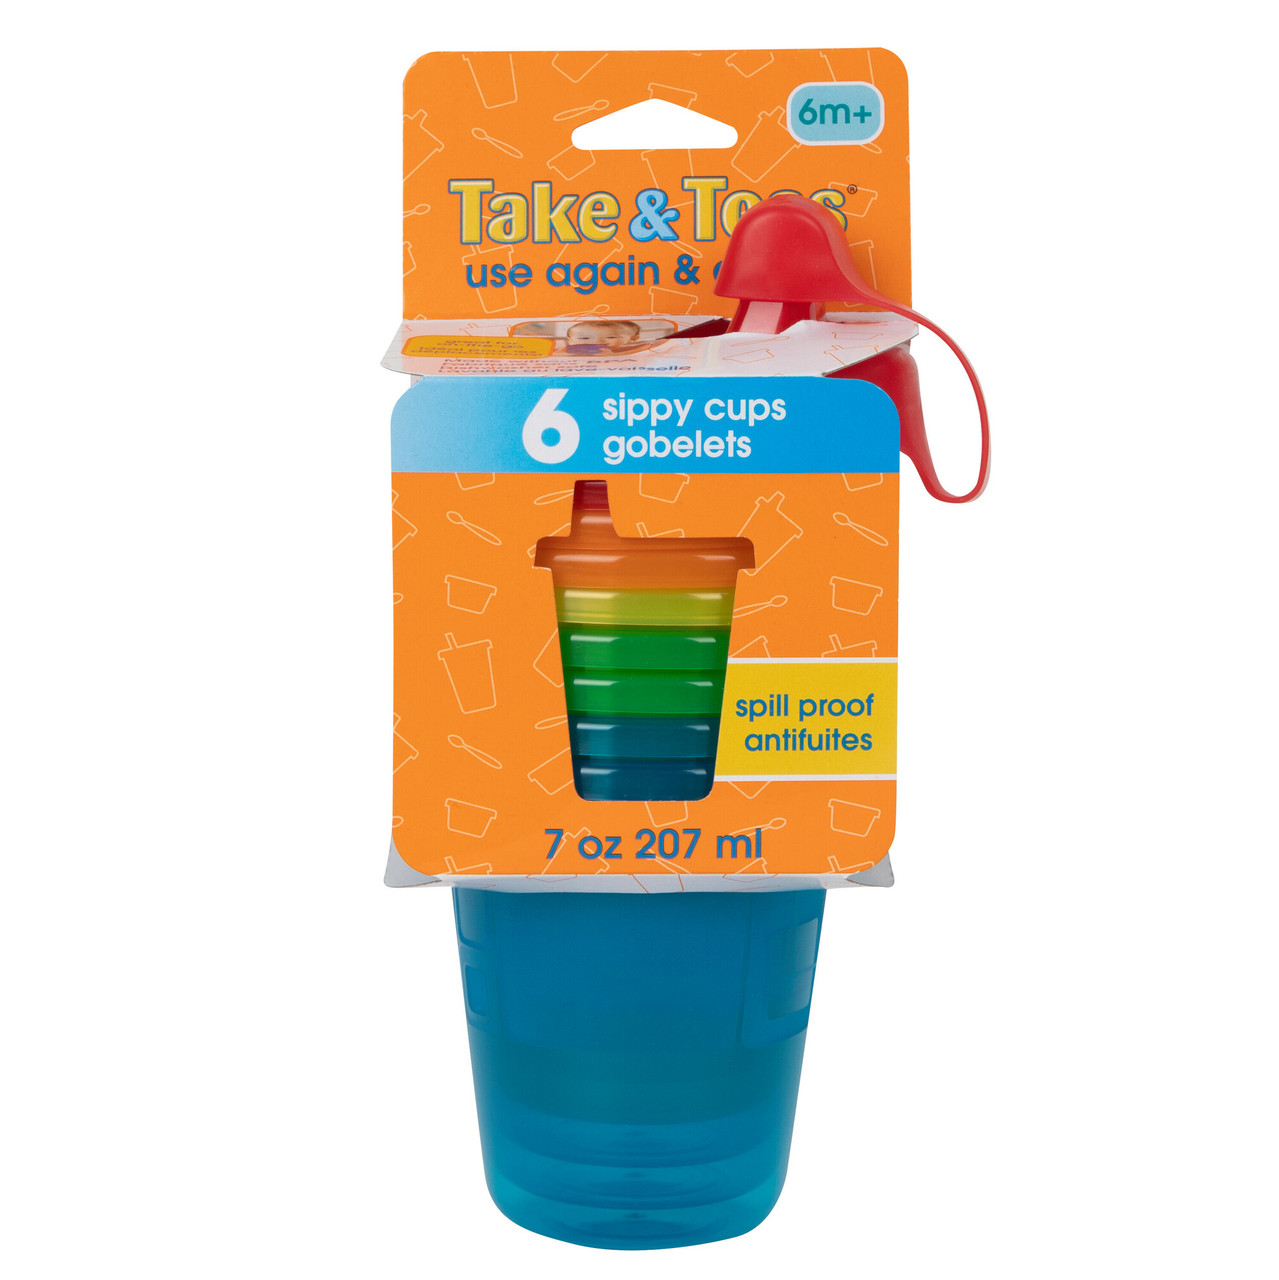 https://www.momjunction.com/wp-content/uploads/product-images/the-first-years-take--toss-spill-proof-sippy-cups_afl228.jpg